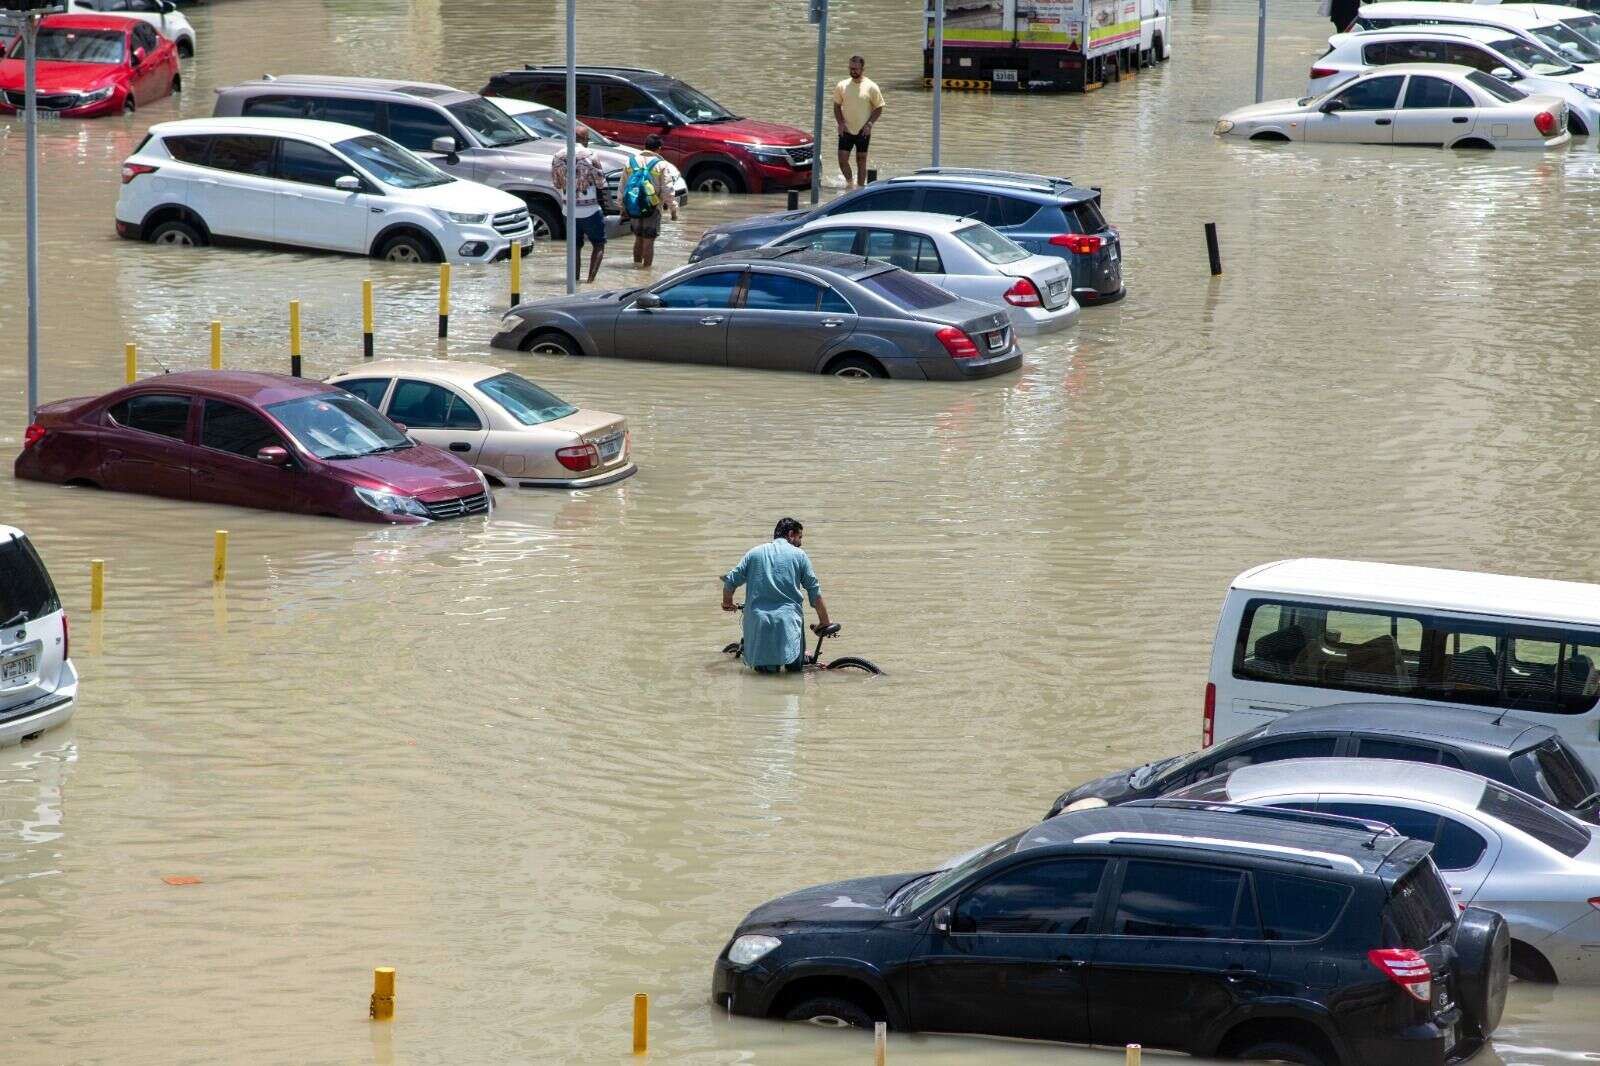 'wasn't easy to leave cars in flood': hundreds of uae residents abandon cars after engines die